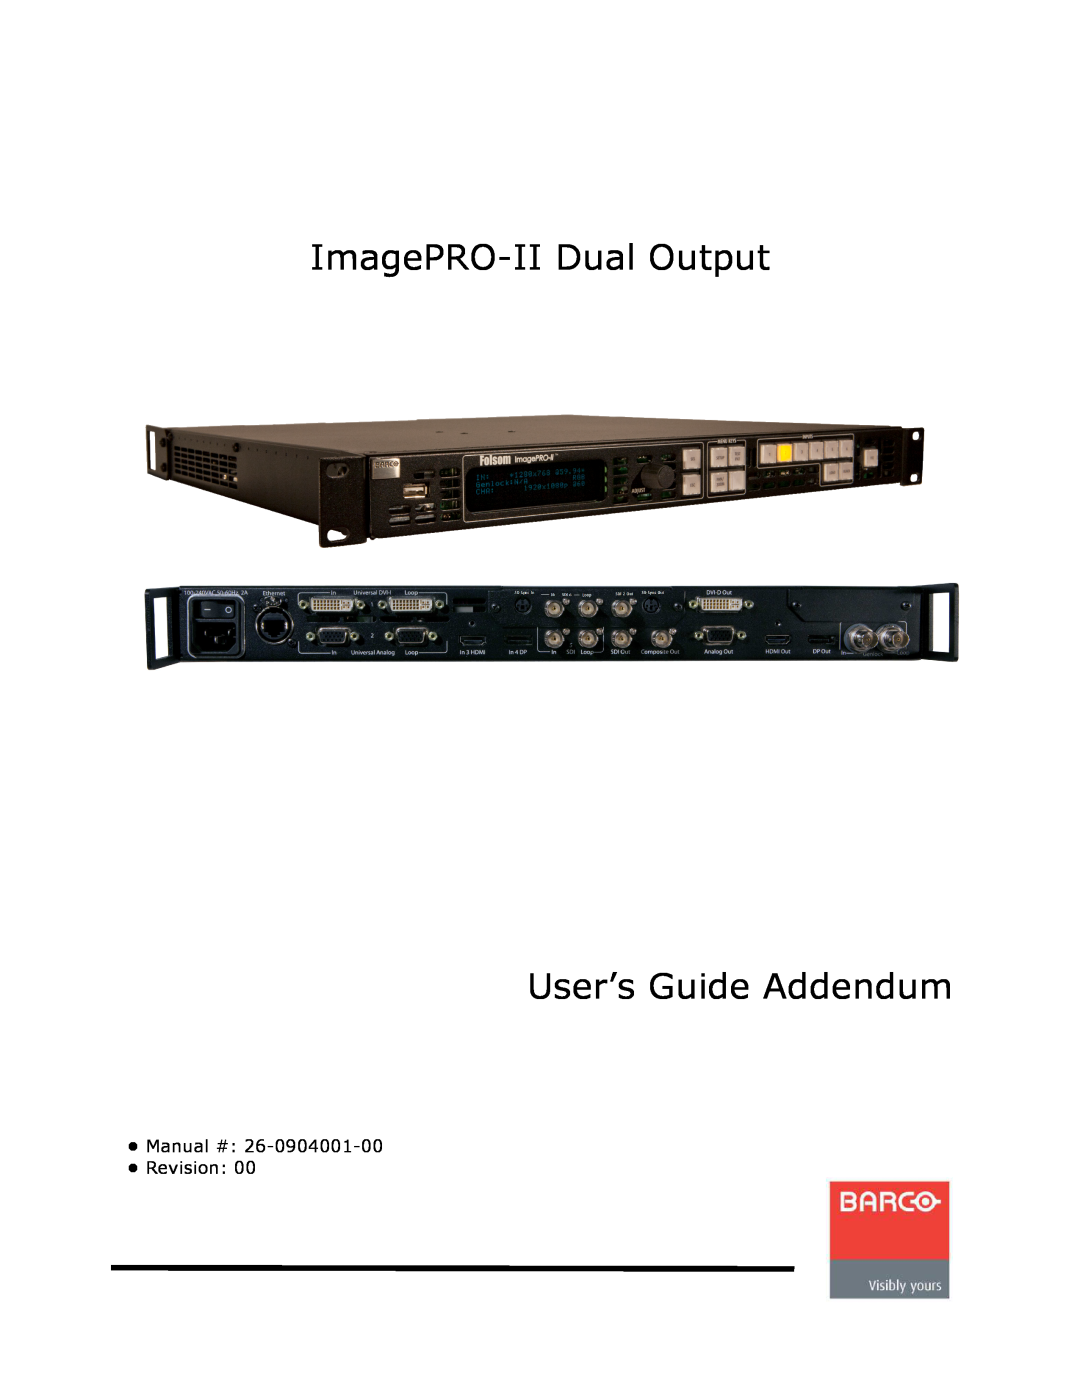 Barco manual ImagePRO-II Dual Output User’s Guide Addendum, Manual # Revision 